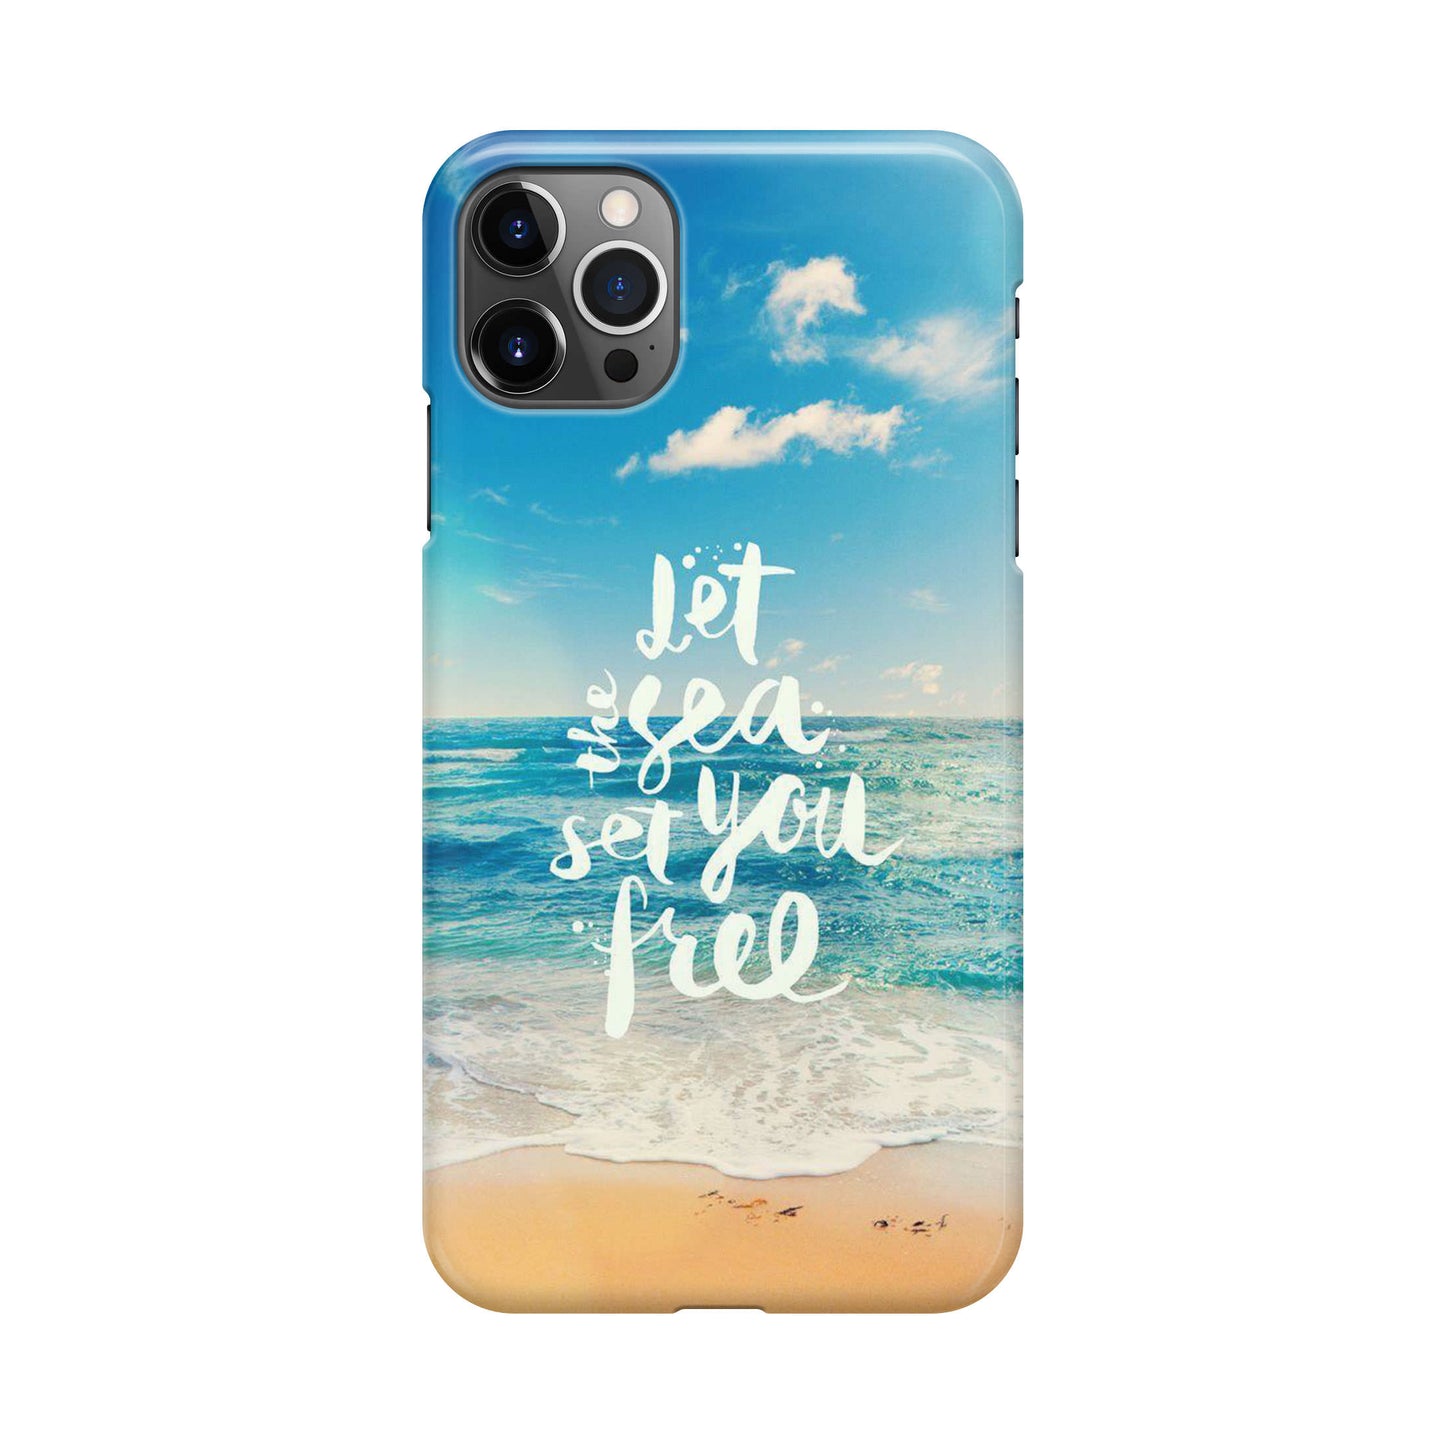 The Sea Set You Free iPhone 12 Pro Case